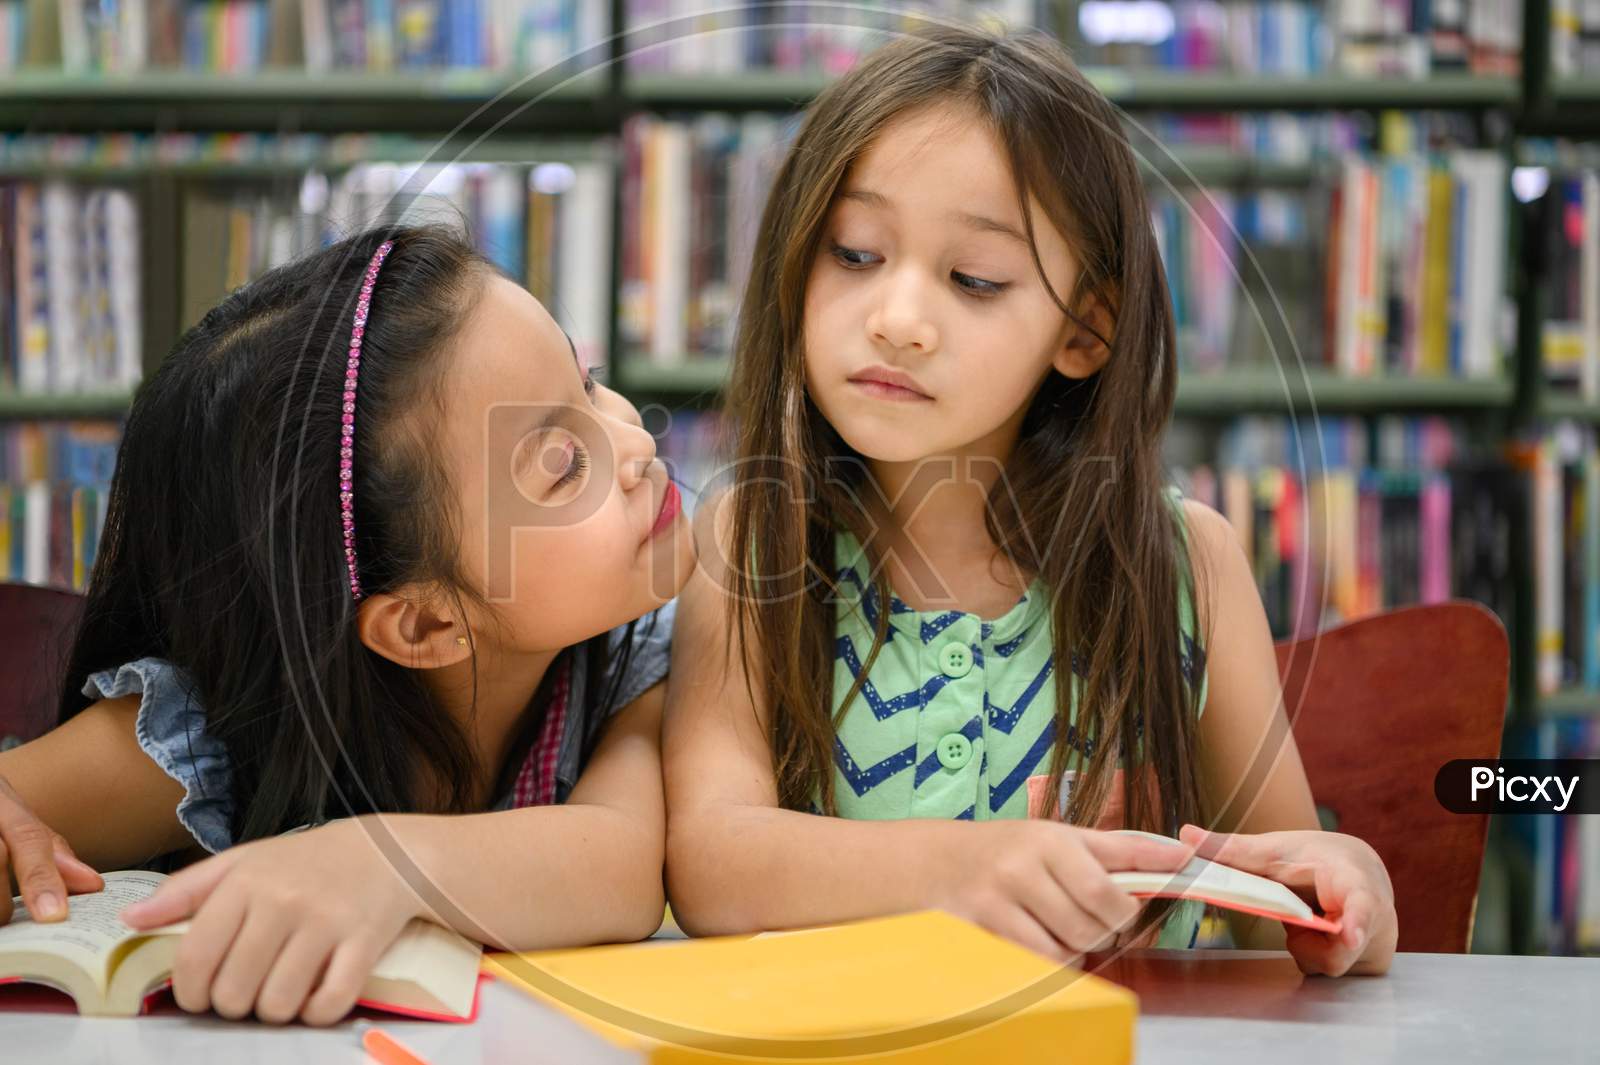 Two Cute Girls Are Jealous Of Each Other While Reading Books In Library While Teacher Teaching. People Lifestyles And Education. Young Friendship And Kids Relationship In School Concept. Face To Face